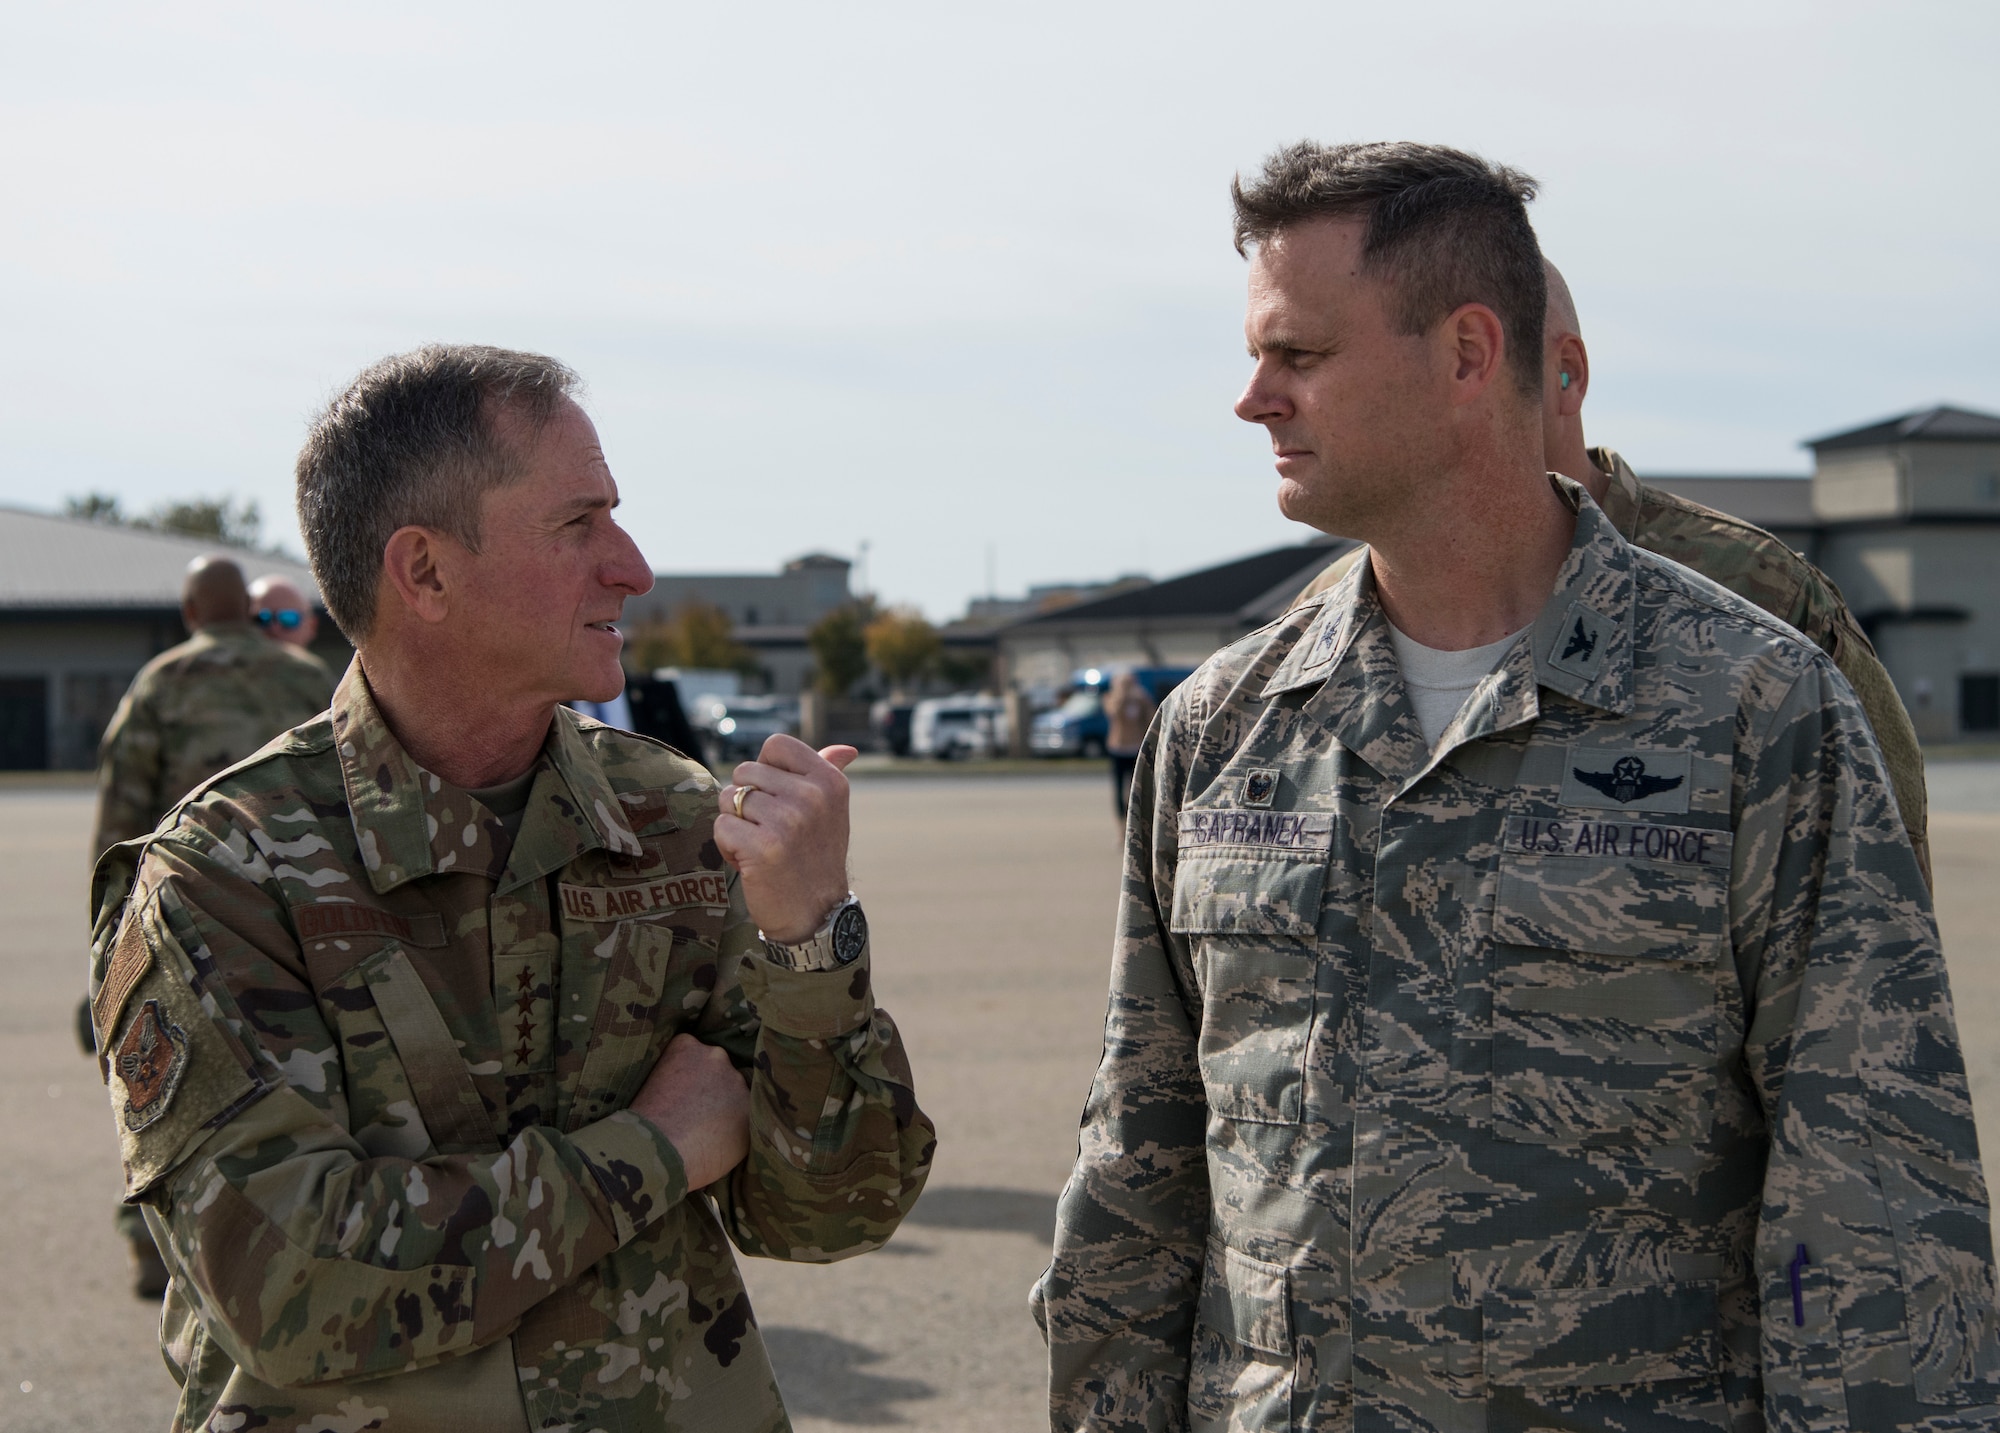 Goldfein is the 21st CSAF and focuses on revitalizing squadrons, strengthening joint leaders and teams, and advancing multi-domain, multi-functional command and control.